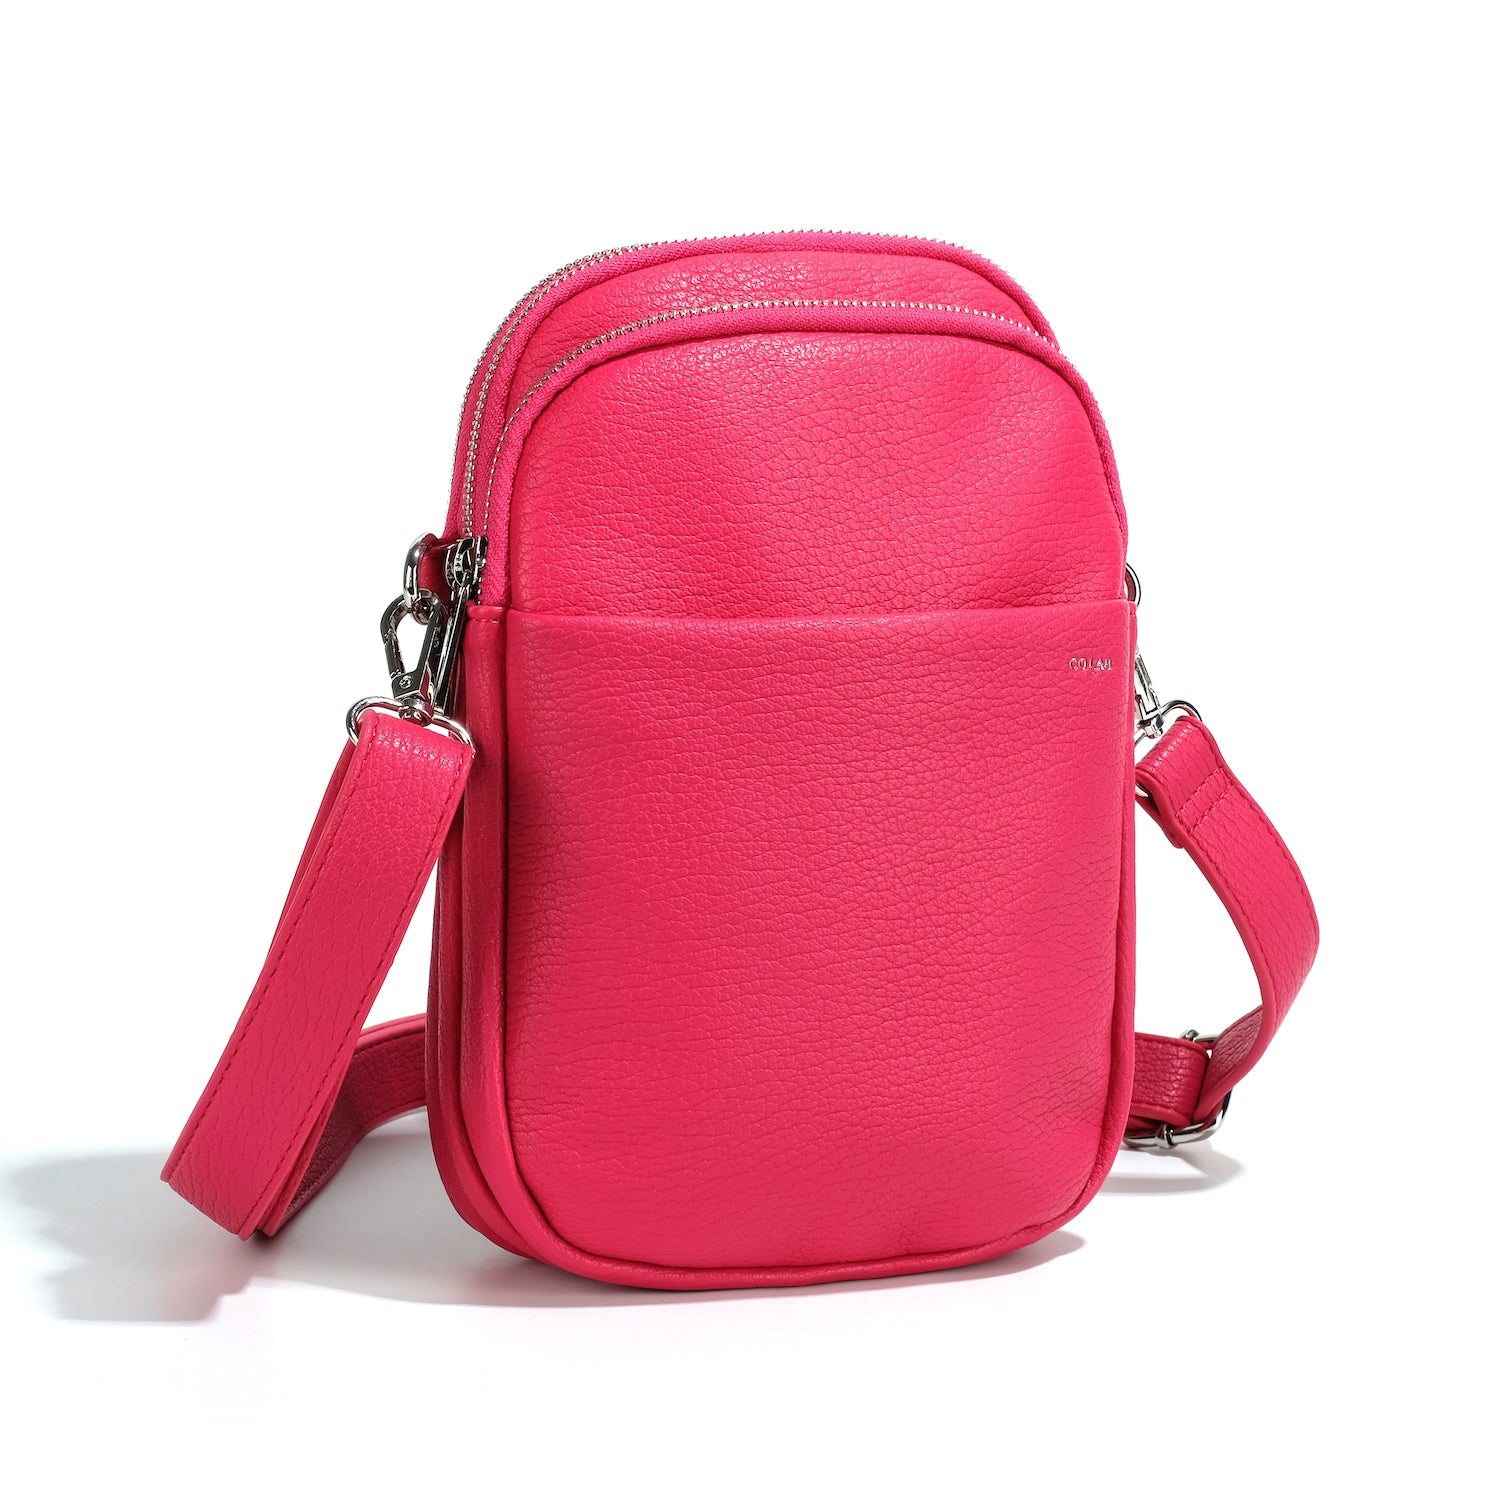 co-lab Park Lane Crossbody - Beetroot Accessories - Other Accessories - Handbags & Wallets by co-lab | Grace the Boutique